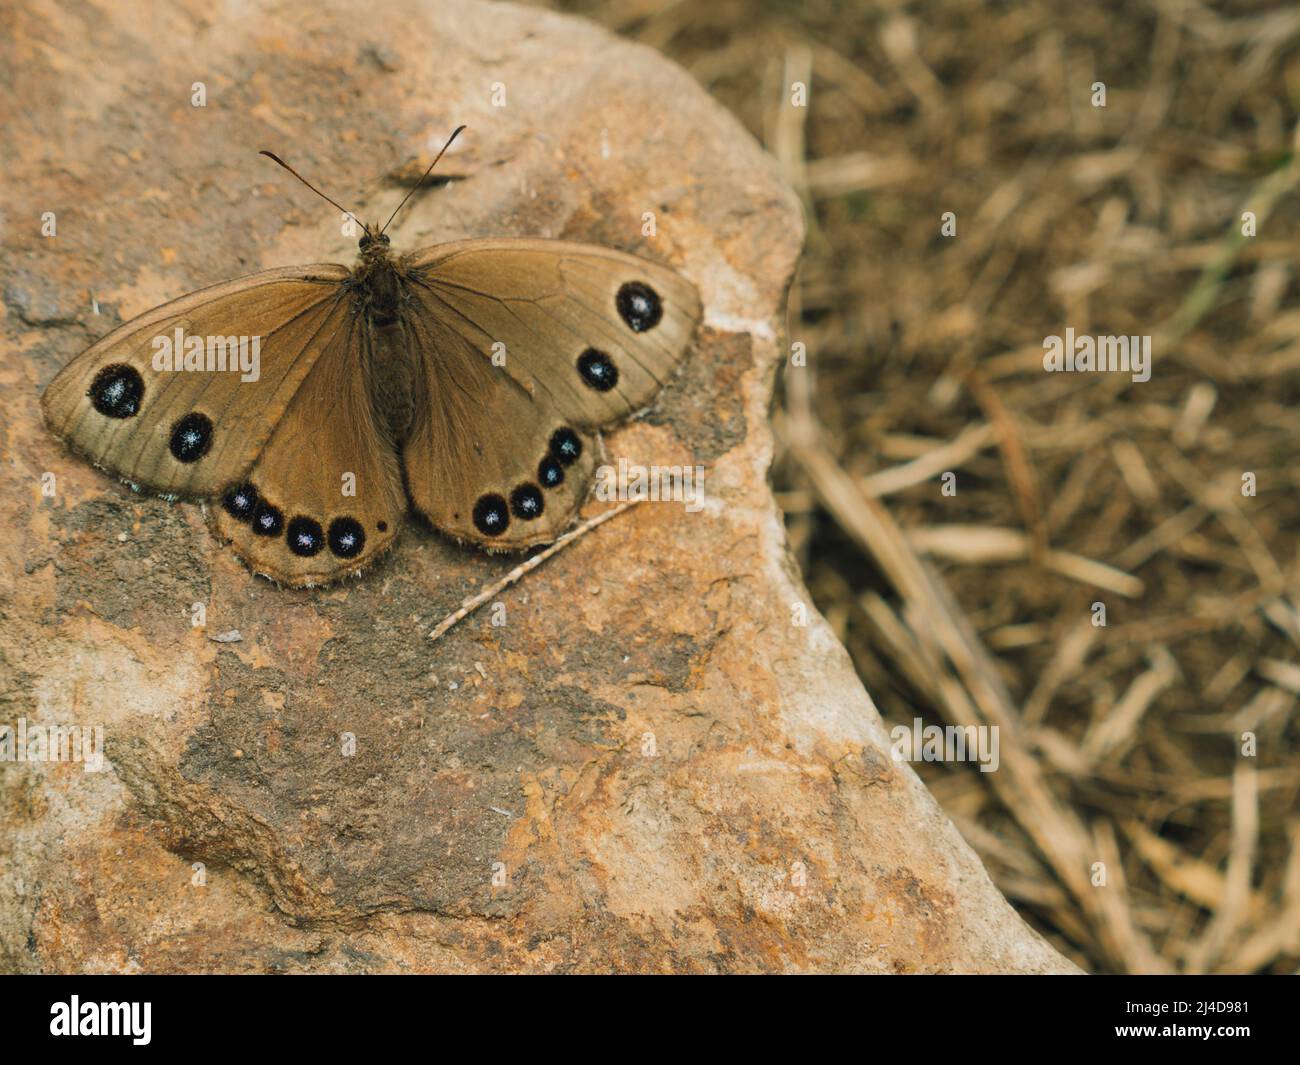 Brown butterfly with blue spots, Taiwan Stock Photo